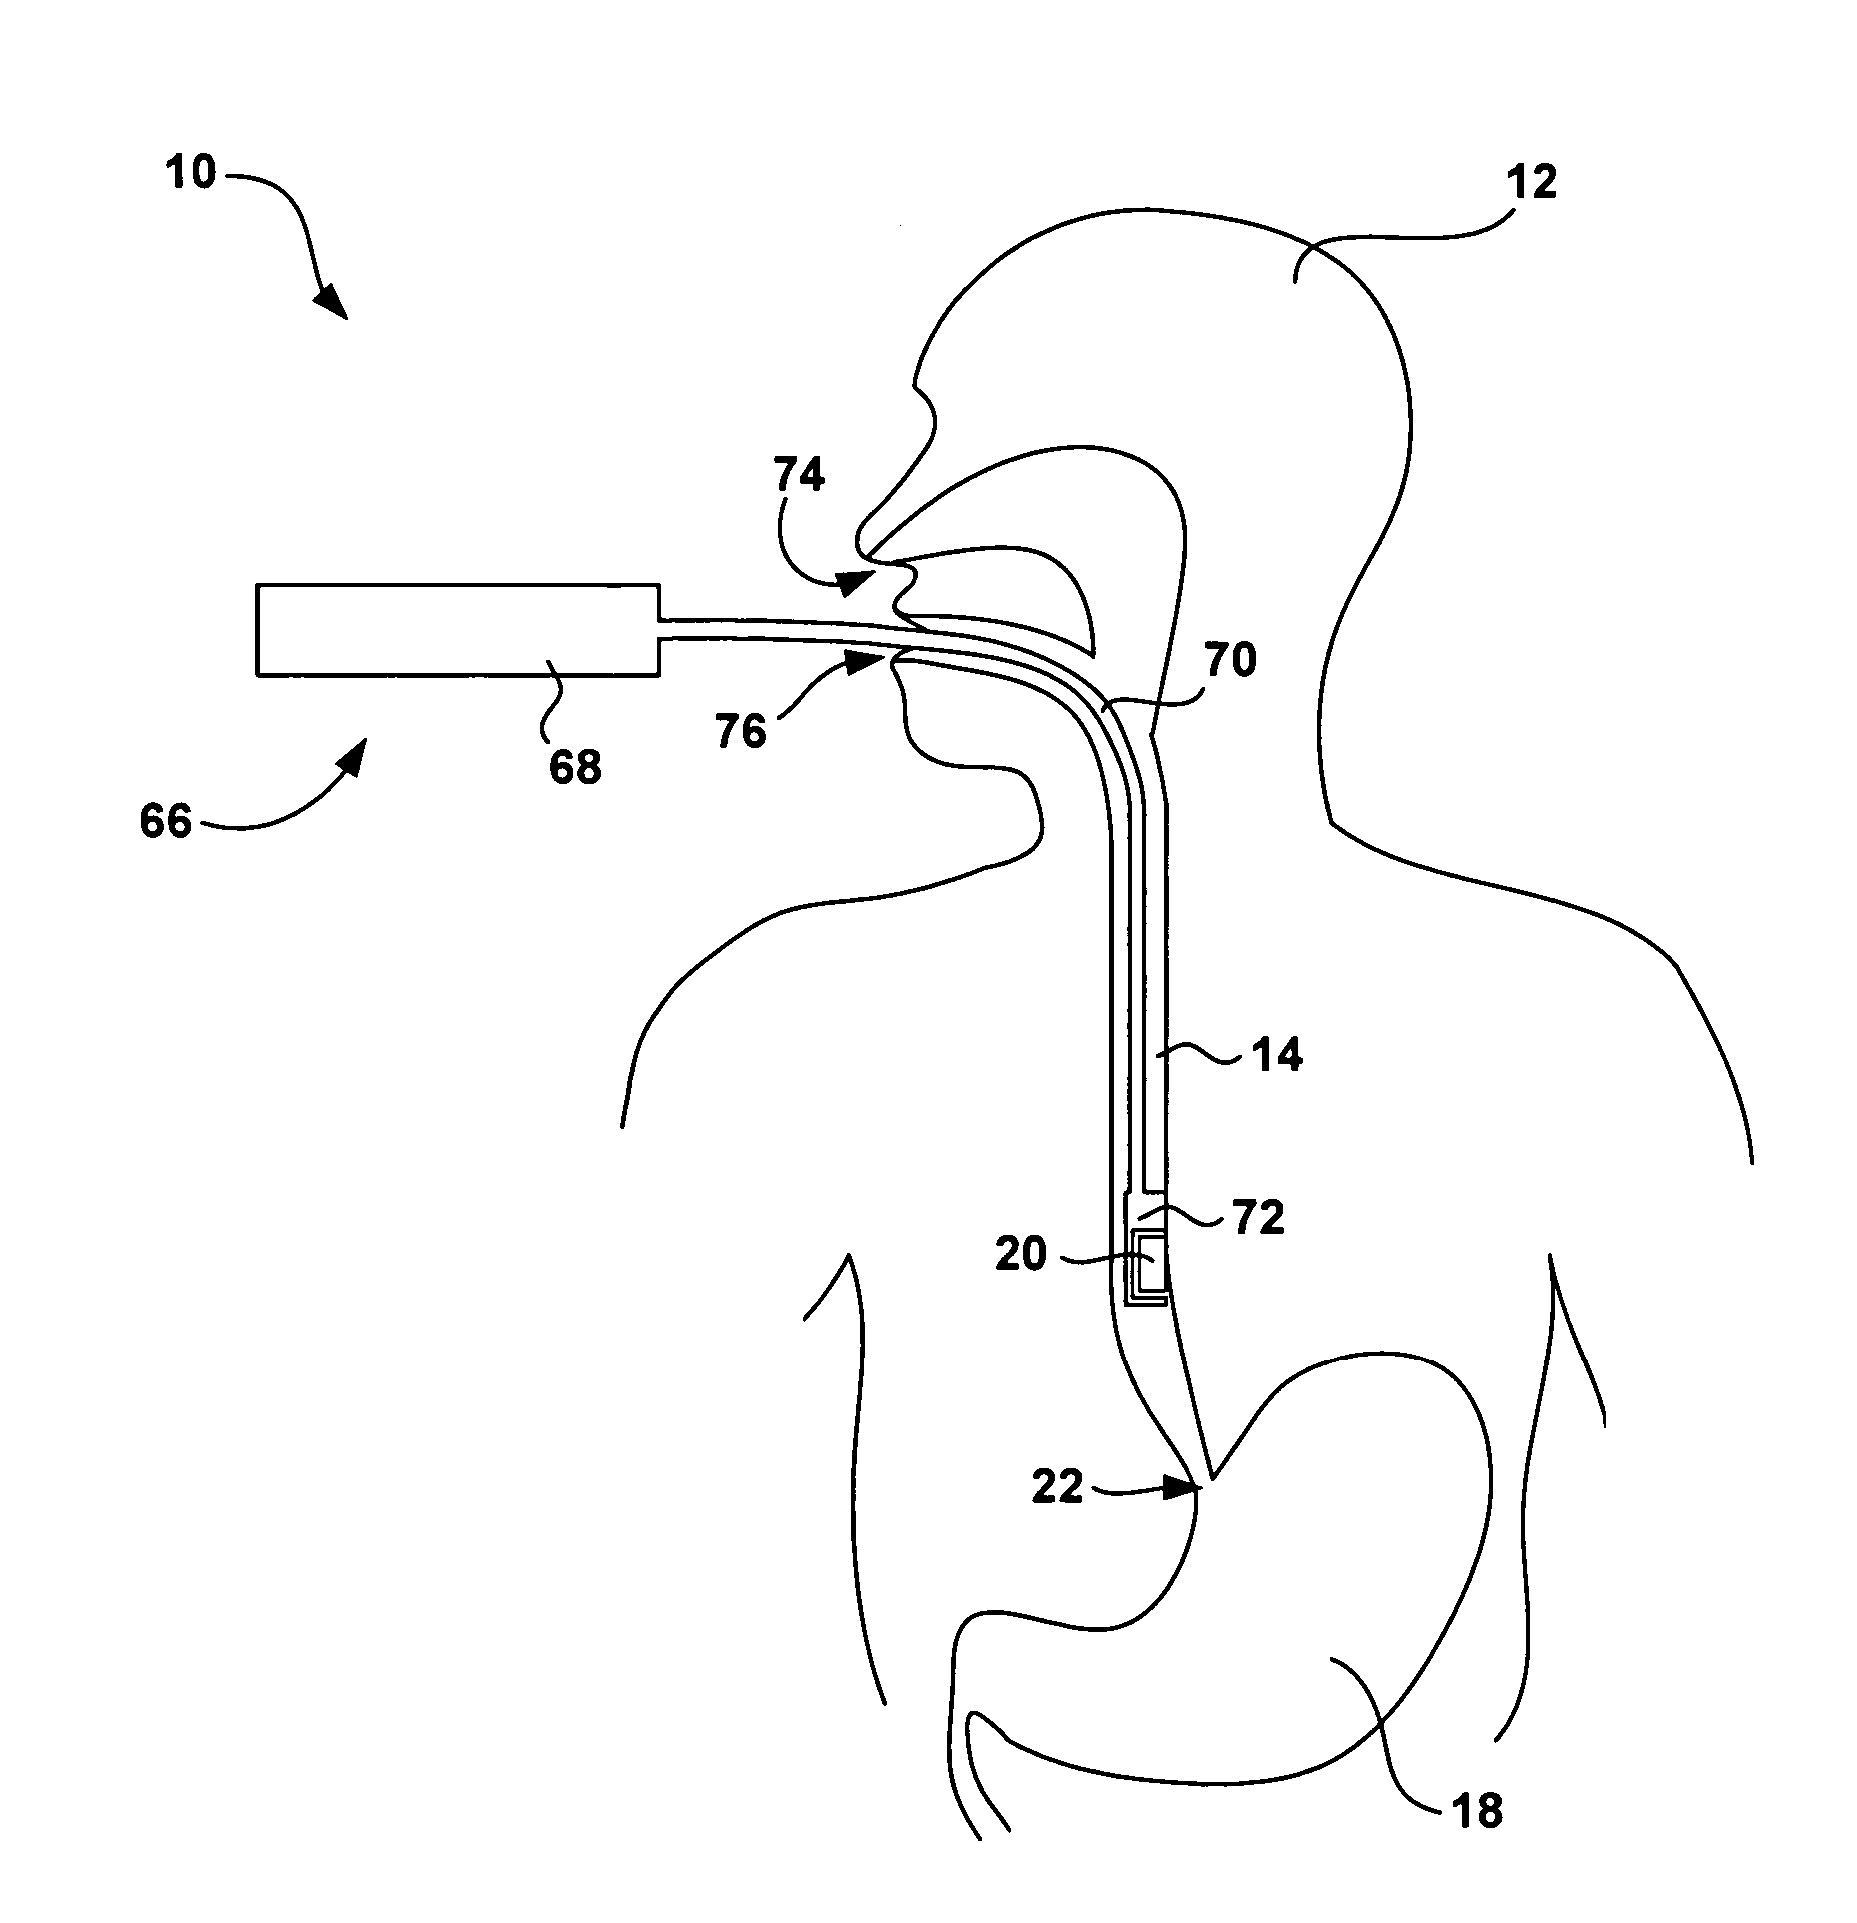 Controlled detachment of intra-luminal medical device